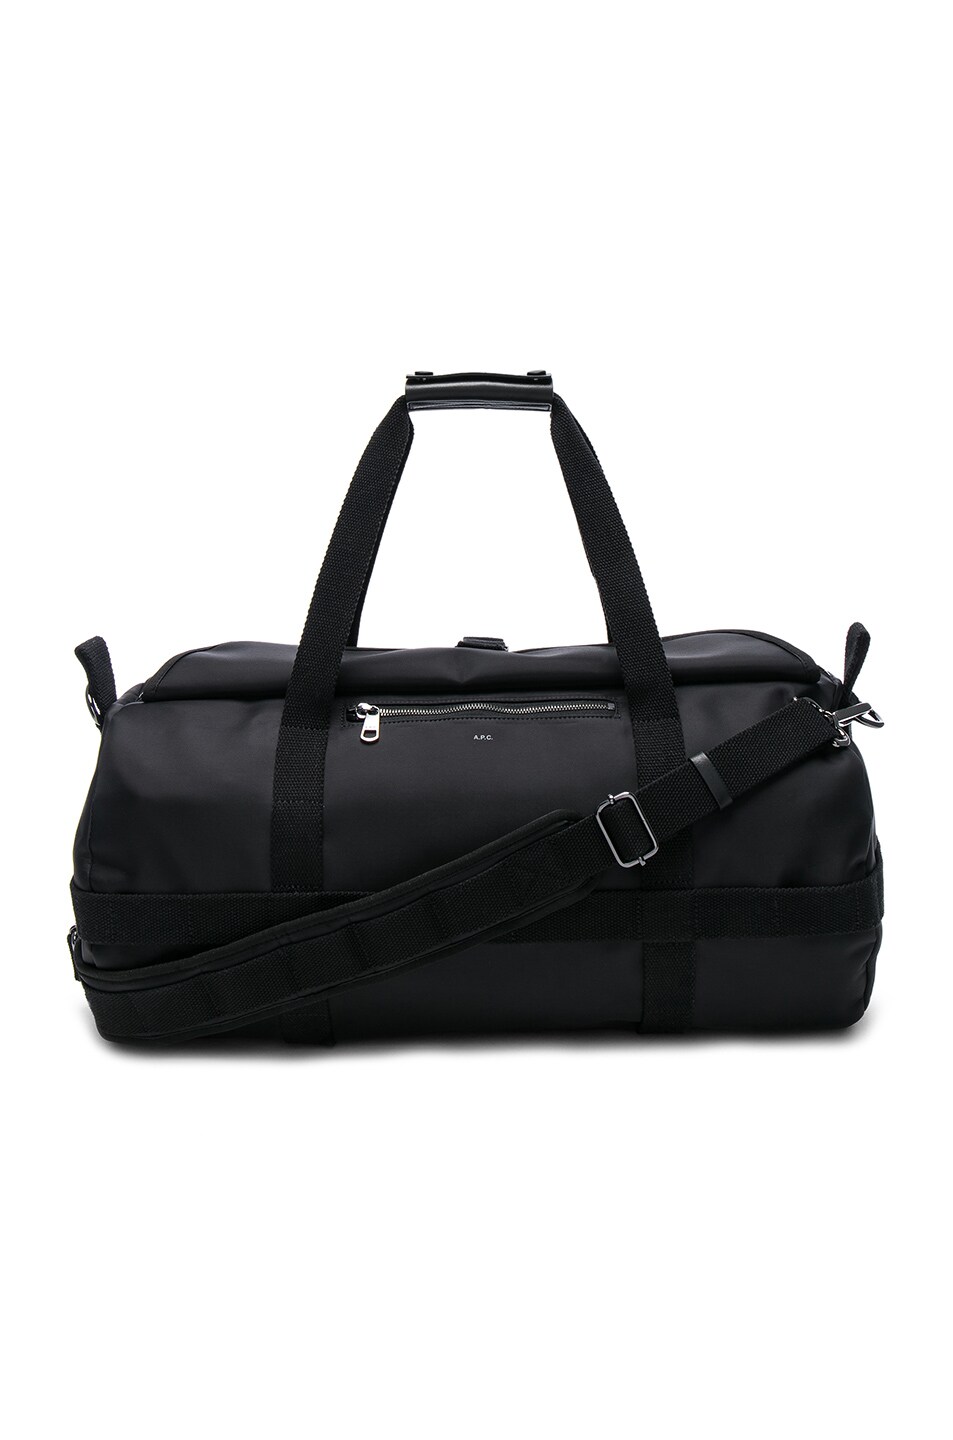 Image 1 of A.P.C. Cyril Bag in Black